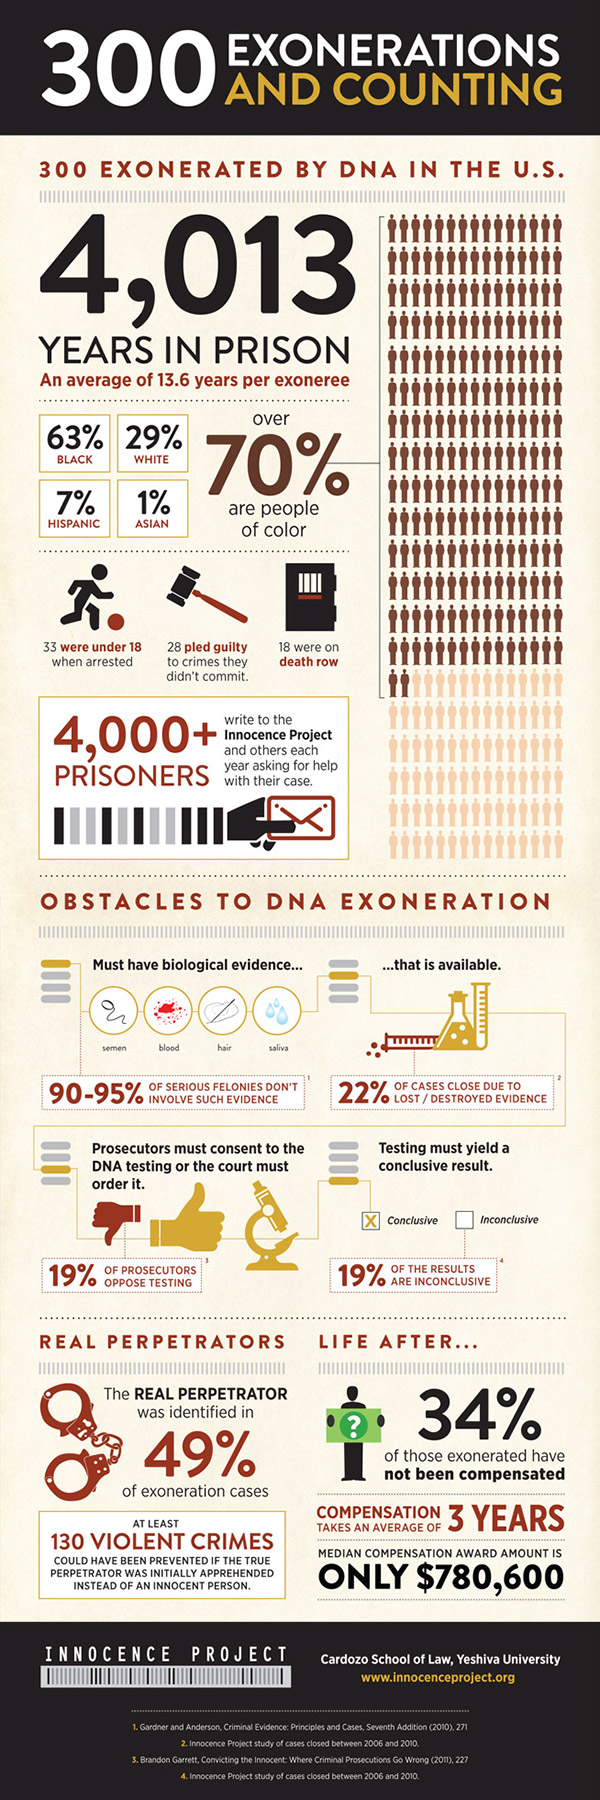 Innocence Project infographic